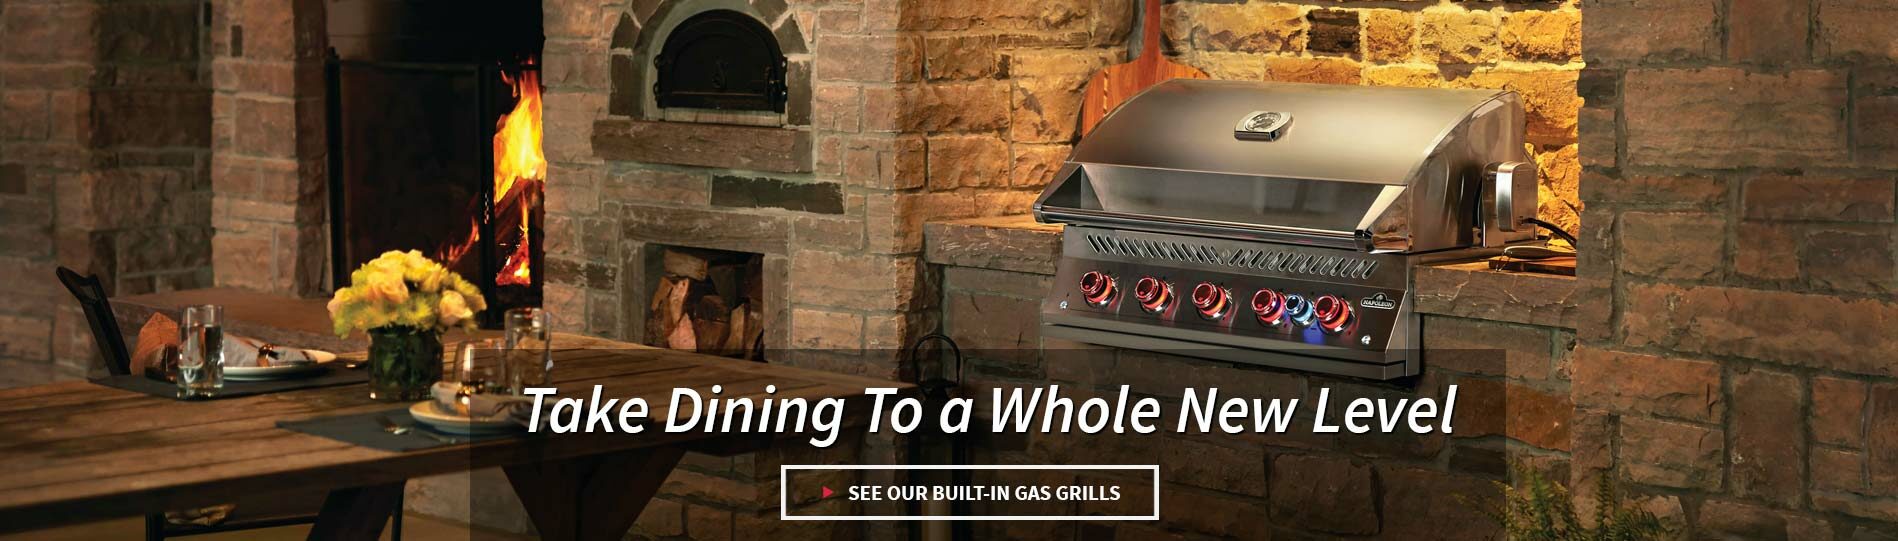 Built In Gas Grills Banner